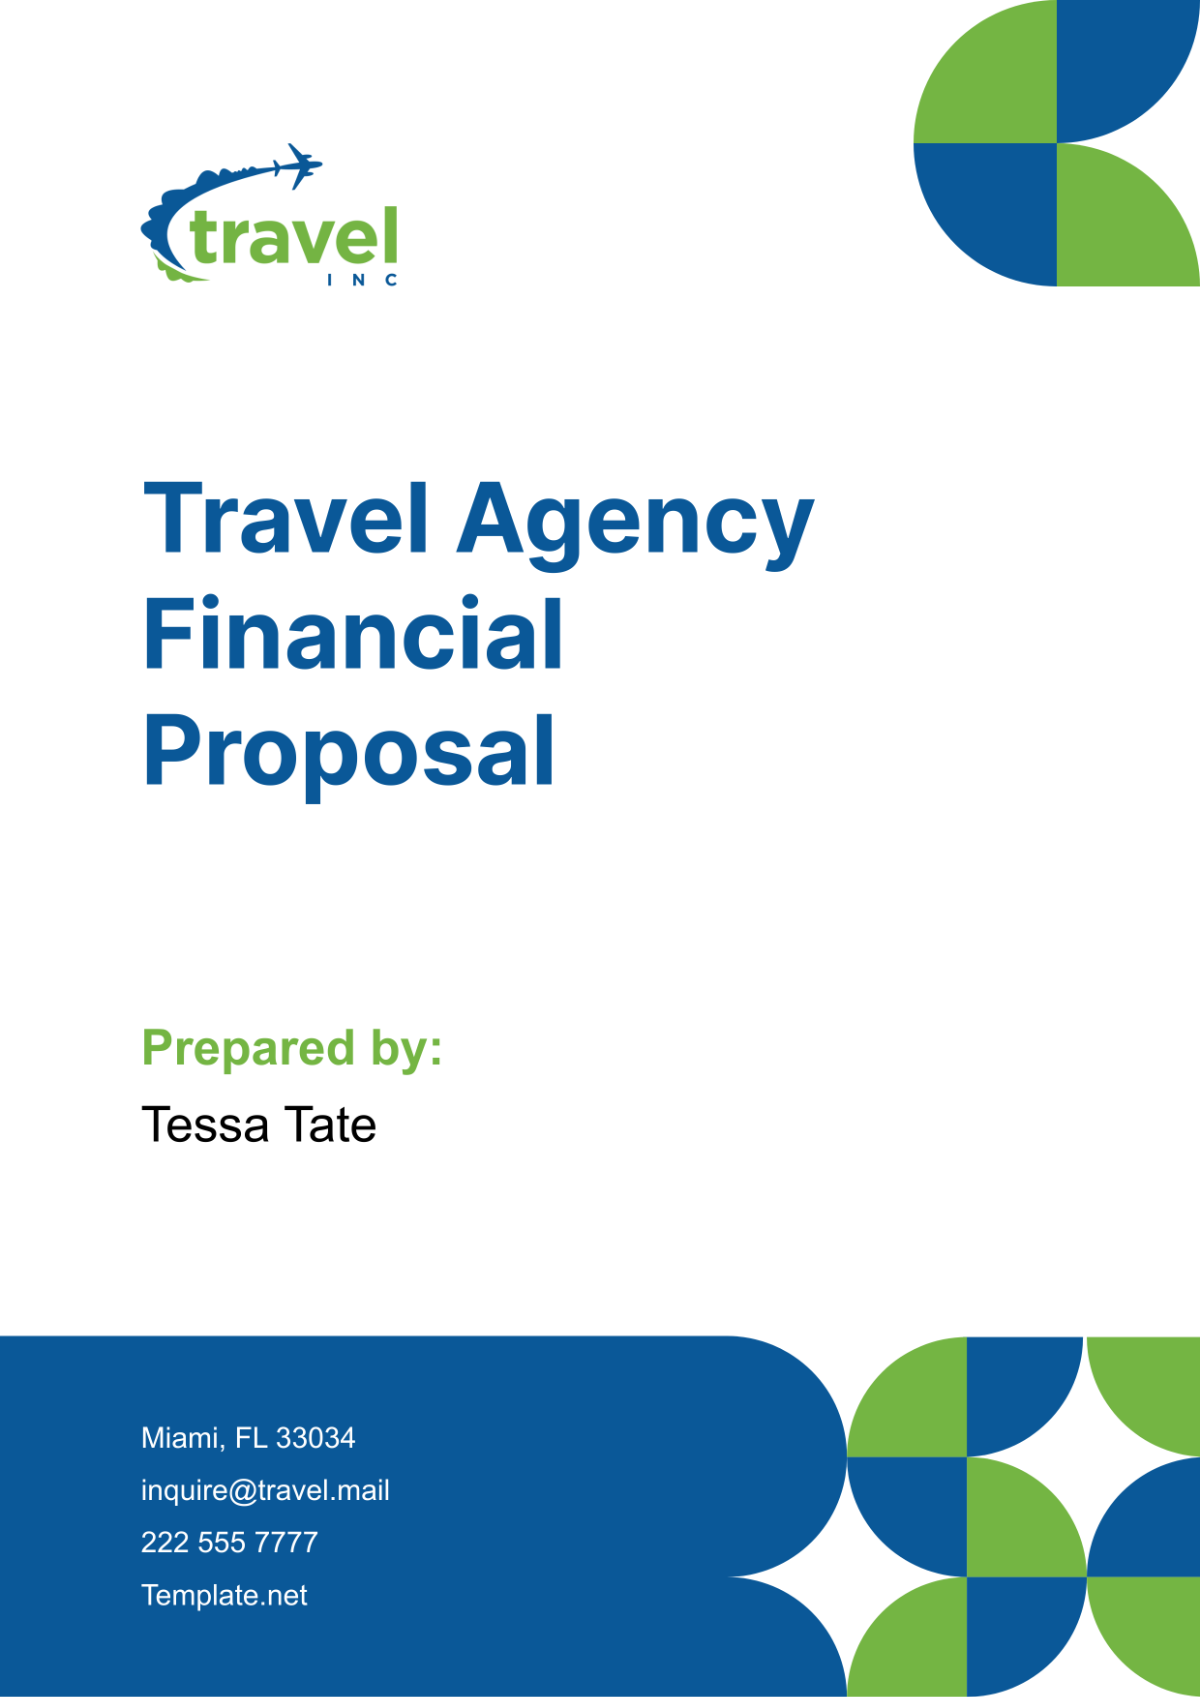 Travel Agency Financial Proposal Template